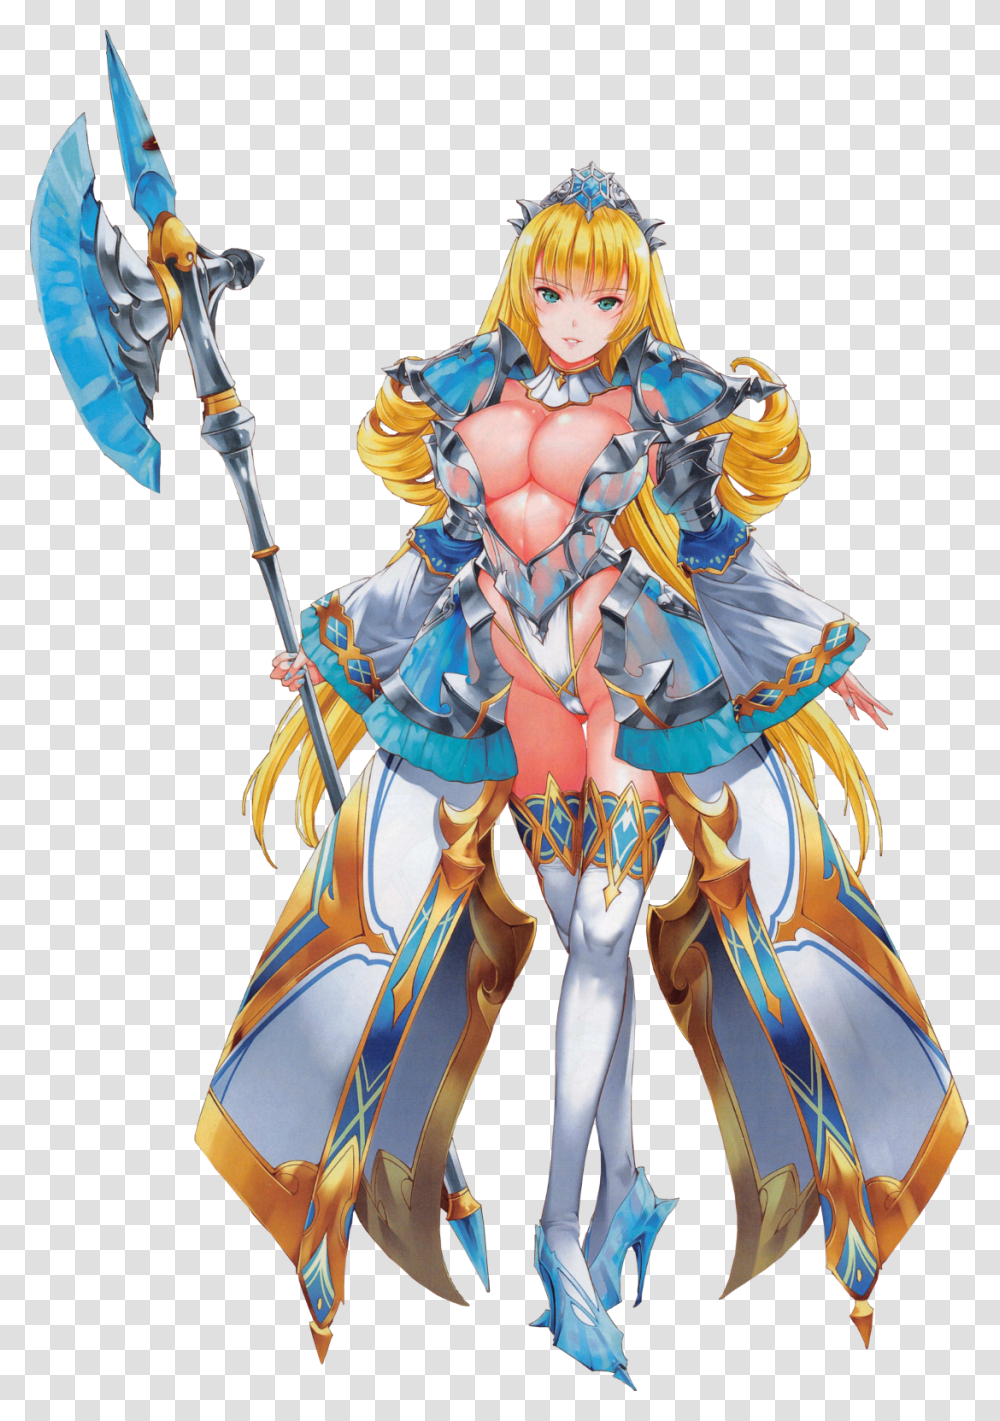 S Blade Wiki Queens Blade White Triangle, Person, Human, Samurai, Knight Transparent Png